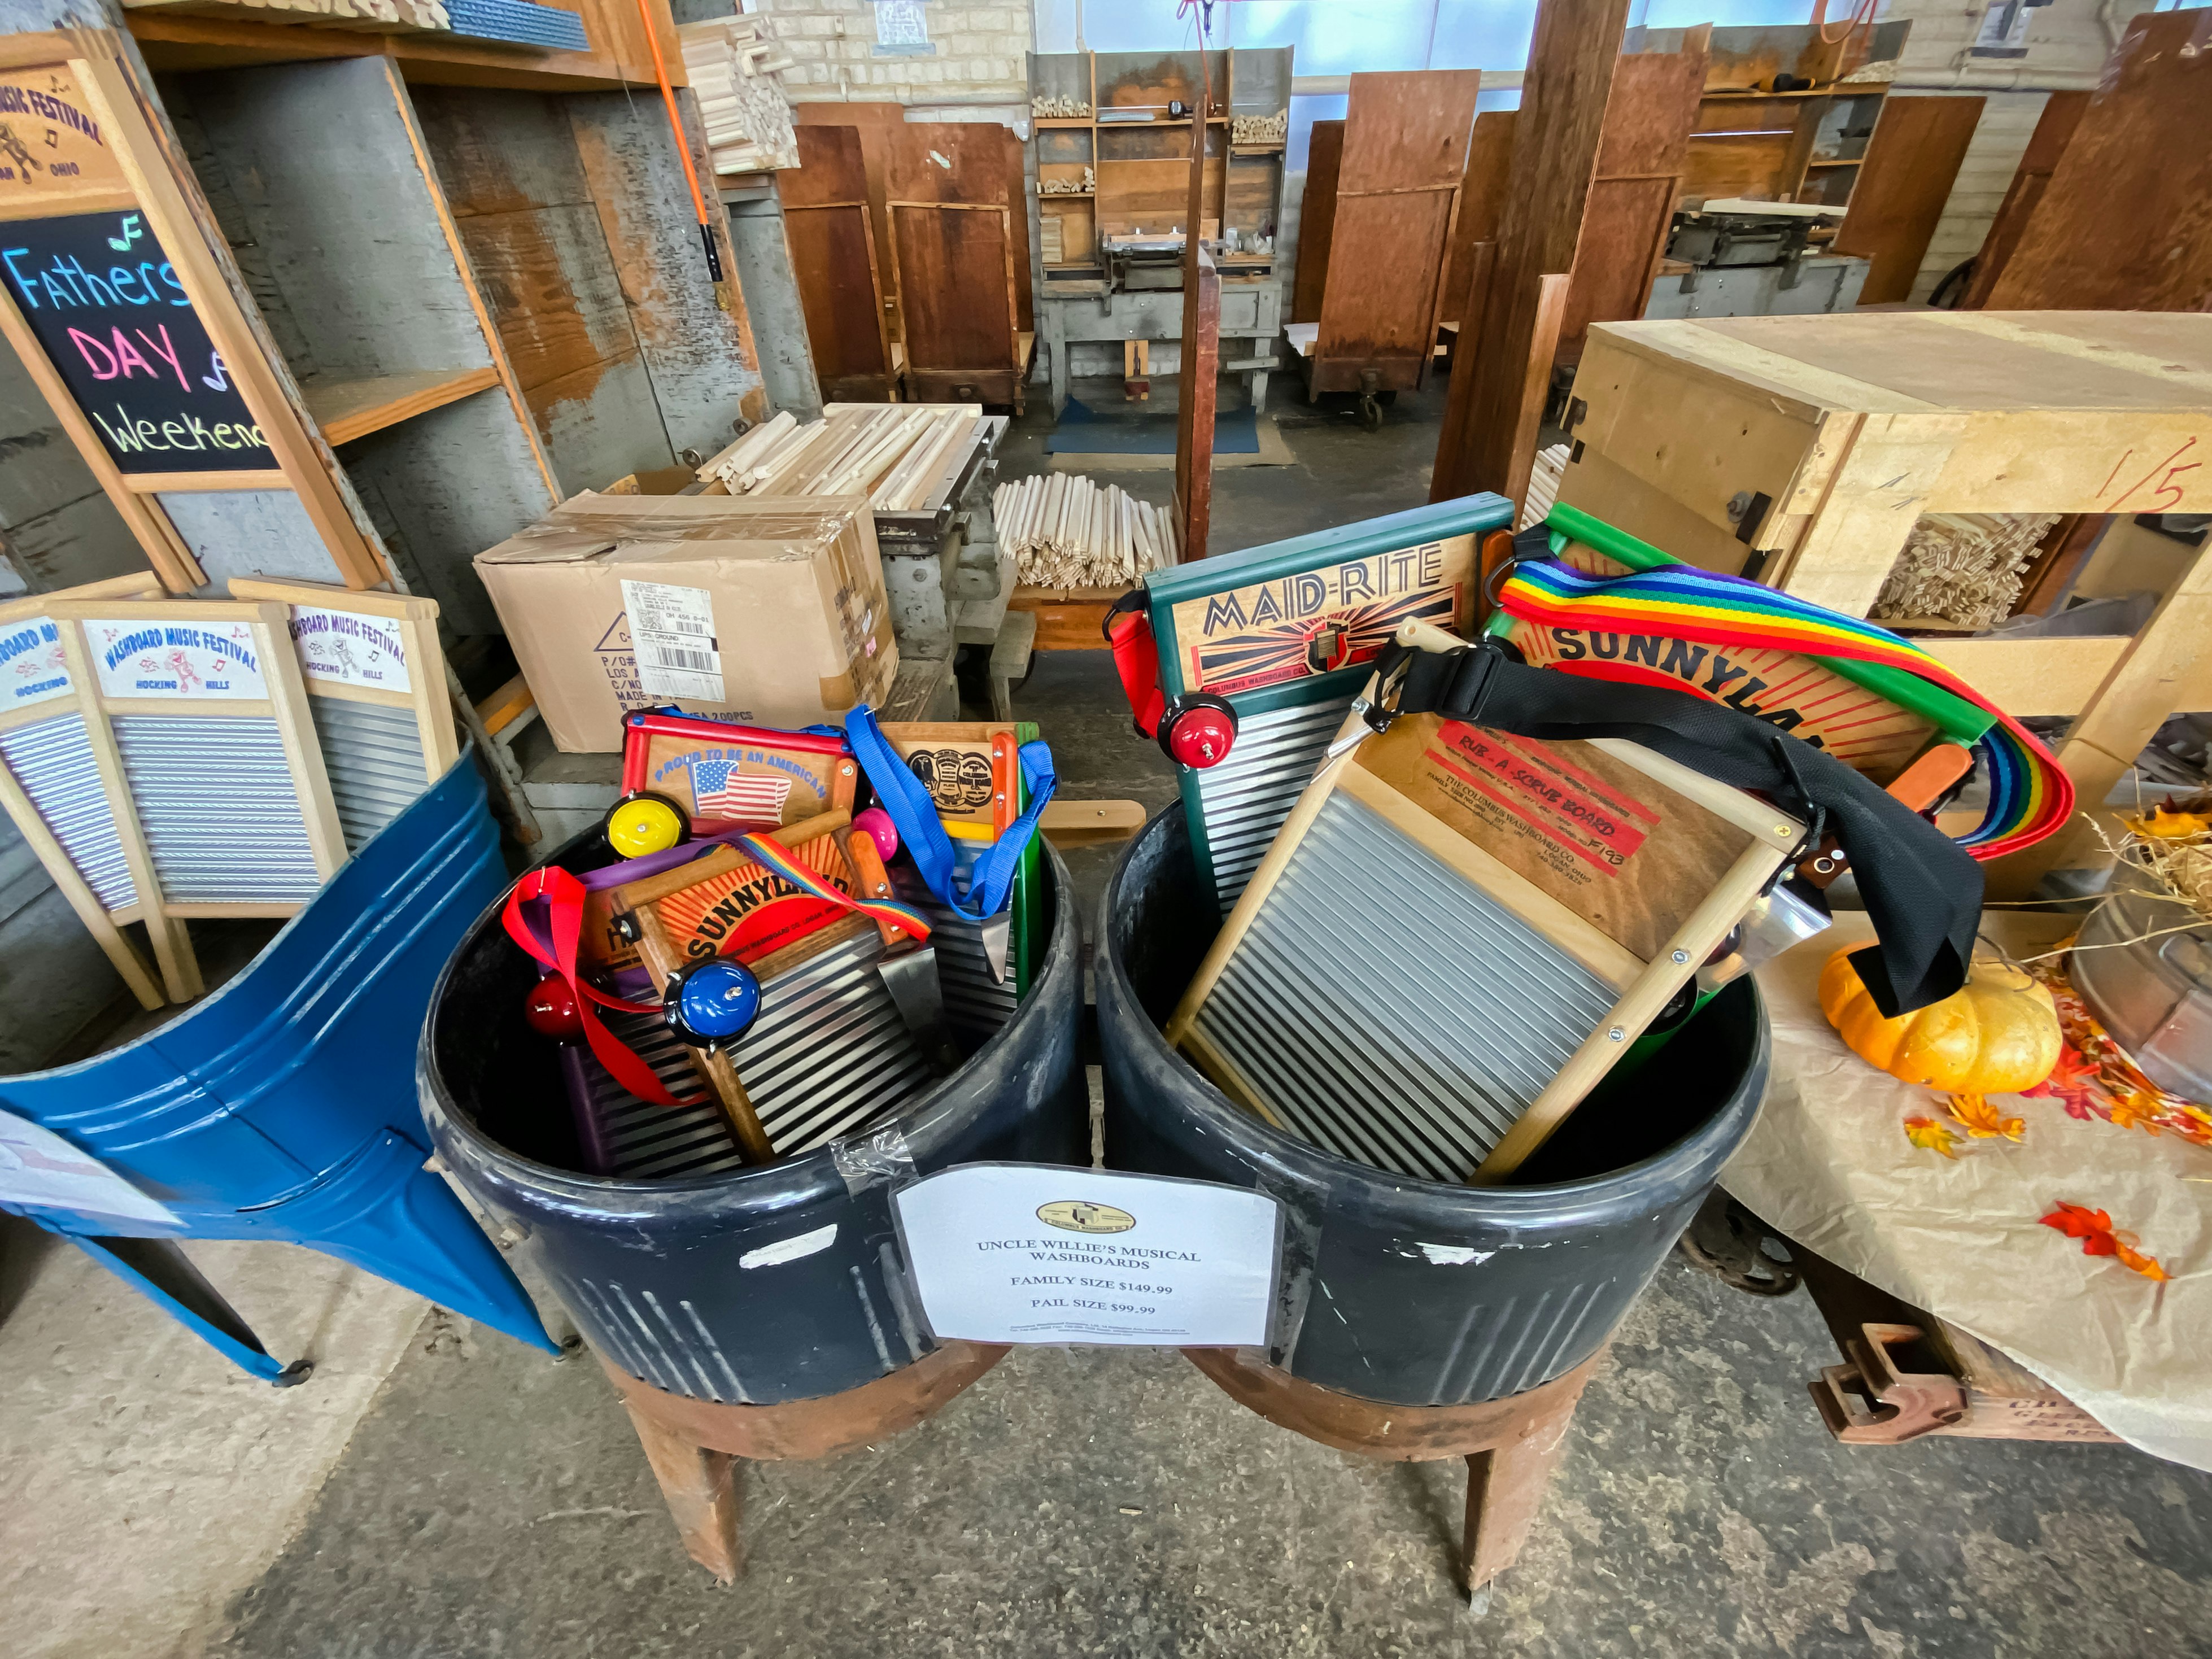 A large metal tub full of washboards outfitted for musical use with bells and colorful neck straps are arranged near a decorative display of fall gourds at the Columbus Washboard Factory.